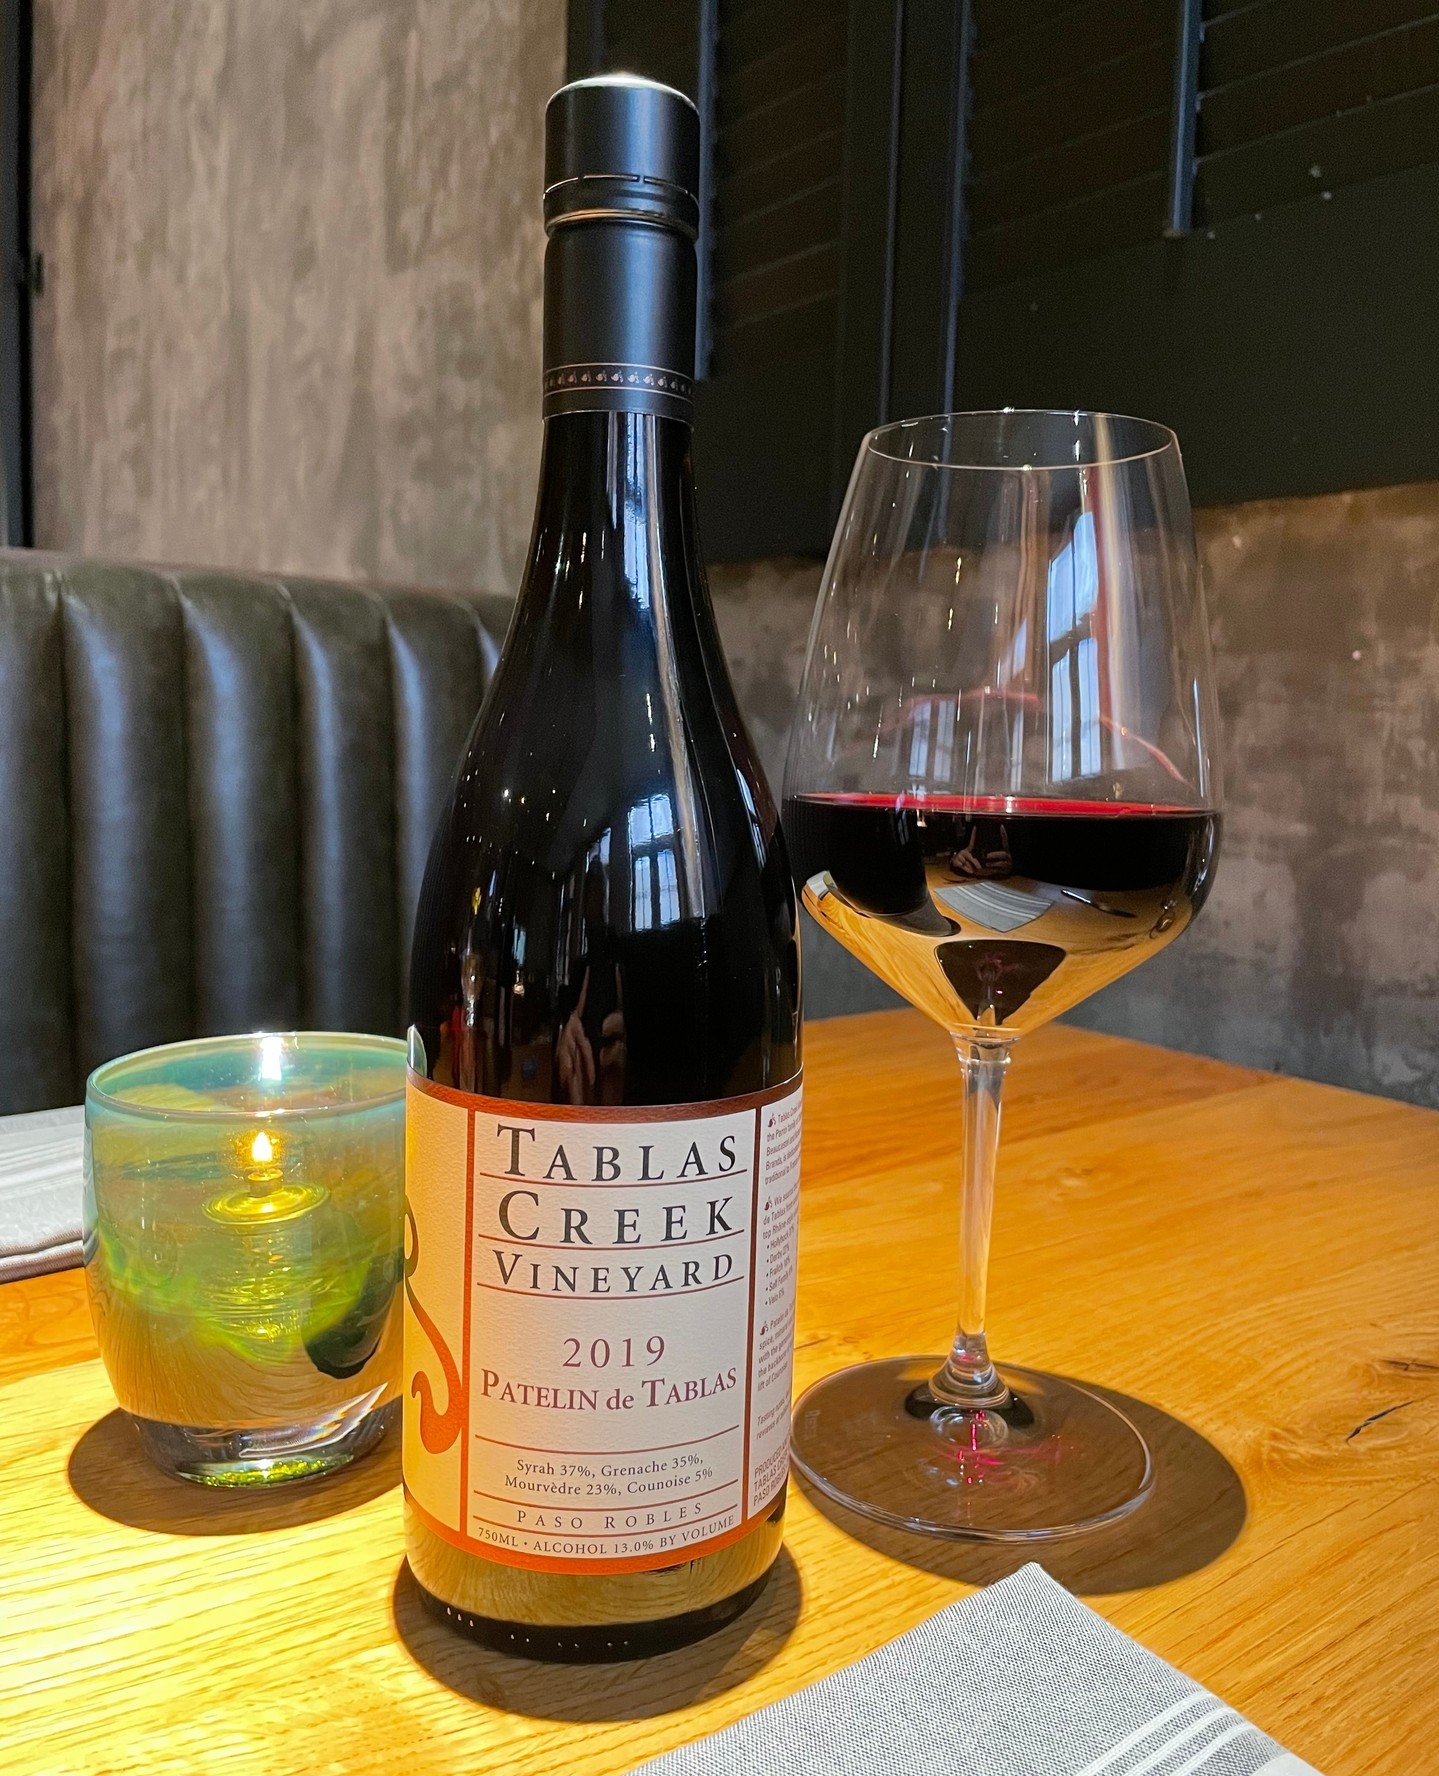 The week is almost over. Relax over some incredible food and a wonderful bottle of wine. May we suggest the Tablas Creek 'Patelin de Tablas'?⁠
⁠
The Tablas Creek Vineyard Patelin de Tablas is a blend of four red Rhône varietals: Syrah, Grenache, Mourvèdre, and Counoise. Like many red wines from the Rhône Valley, it is based on the dark fruit, mineral and spice of Syrah, with the brightness and fresh acidity of Grenache, the structure and meatiness of Mourvèdre and small additions of Counoise for complexity.⁠
⁠
Full wine list at EstablishmentCHS.com/wine